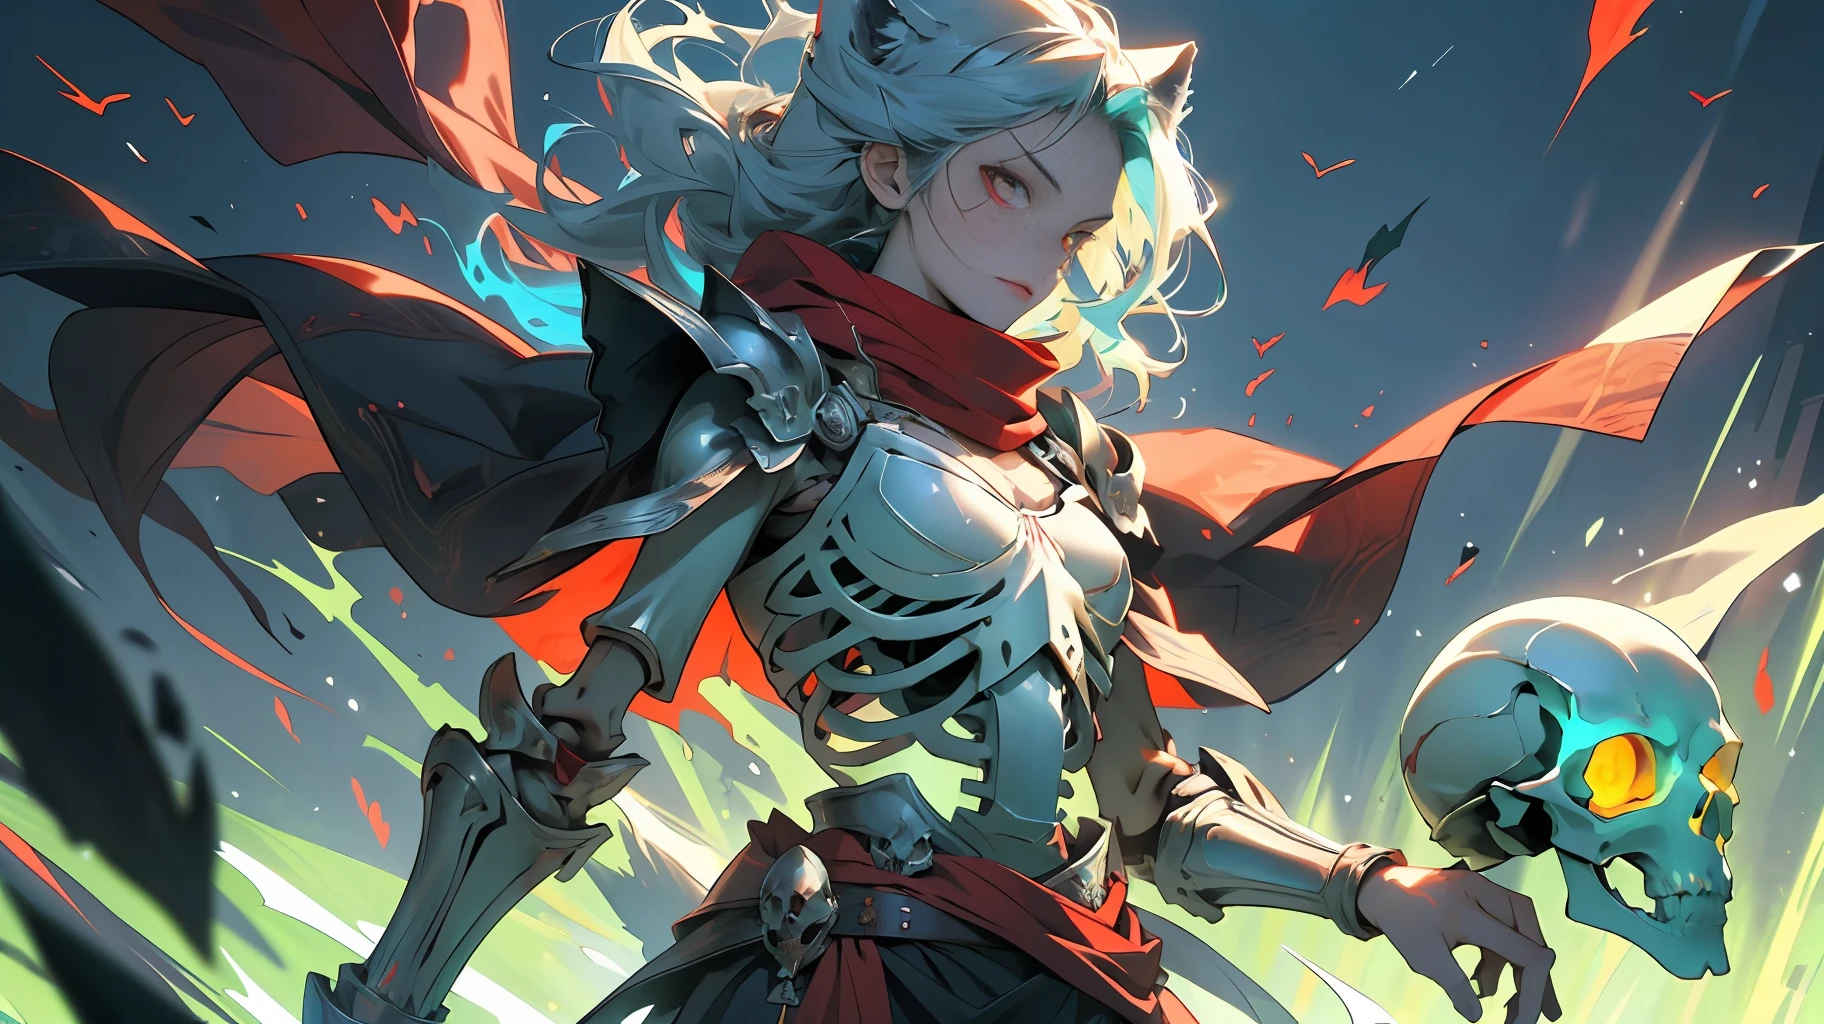 (Green + Red Flame: 1.5 + Complex Skeleton Armor + Wolf Skull Decoration on the Shoulder of the Armor + Red Scarf Swaying in the Wind), (A Charming Girl + Delicate Facial Features + Red Glowing Eyes), Hell Scene in the background, Skeleton Undead Soldiers on both sides, undispersed souls flying all over the sky, 8K, high detail, face is not blurred, normal human fingers, full body, vista, face is not white and ossified